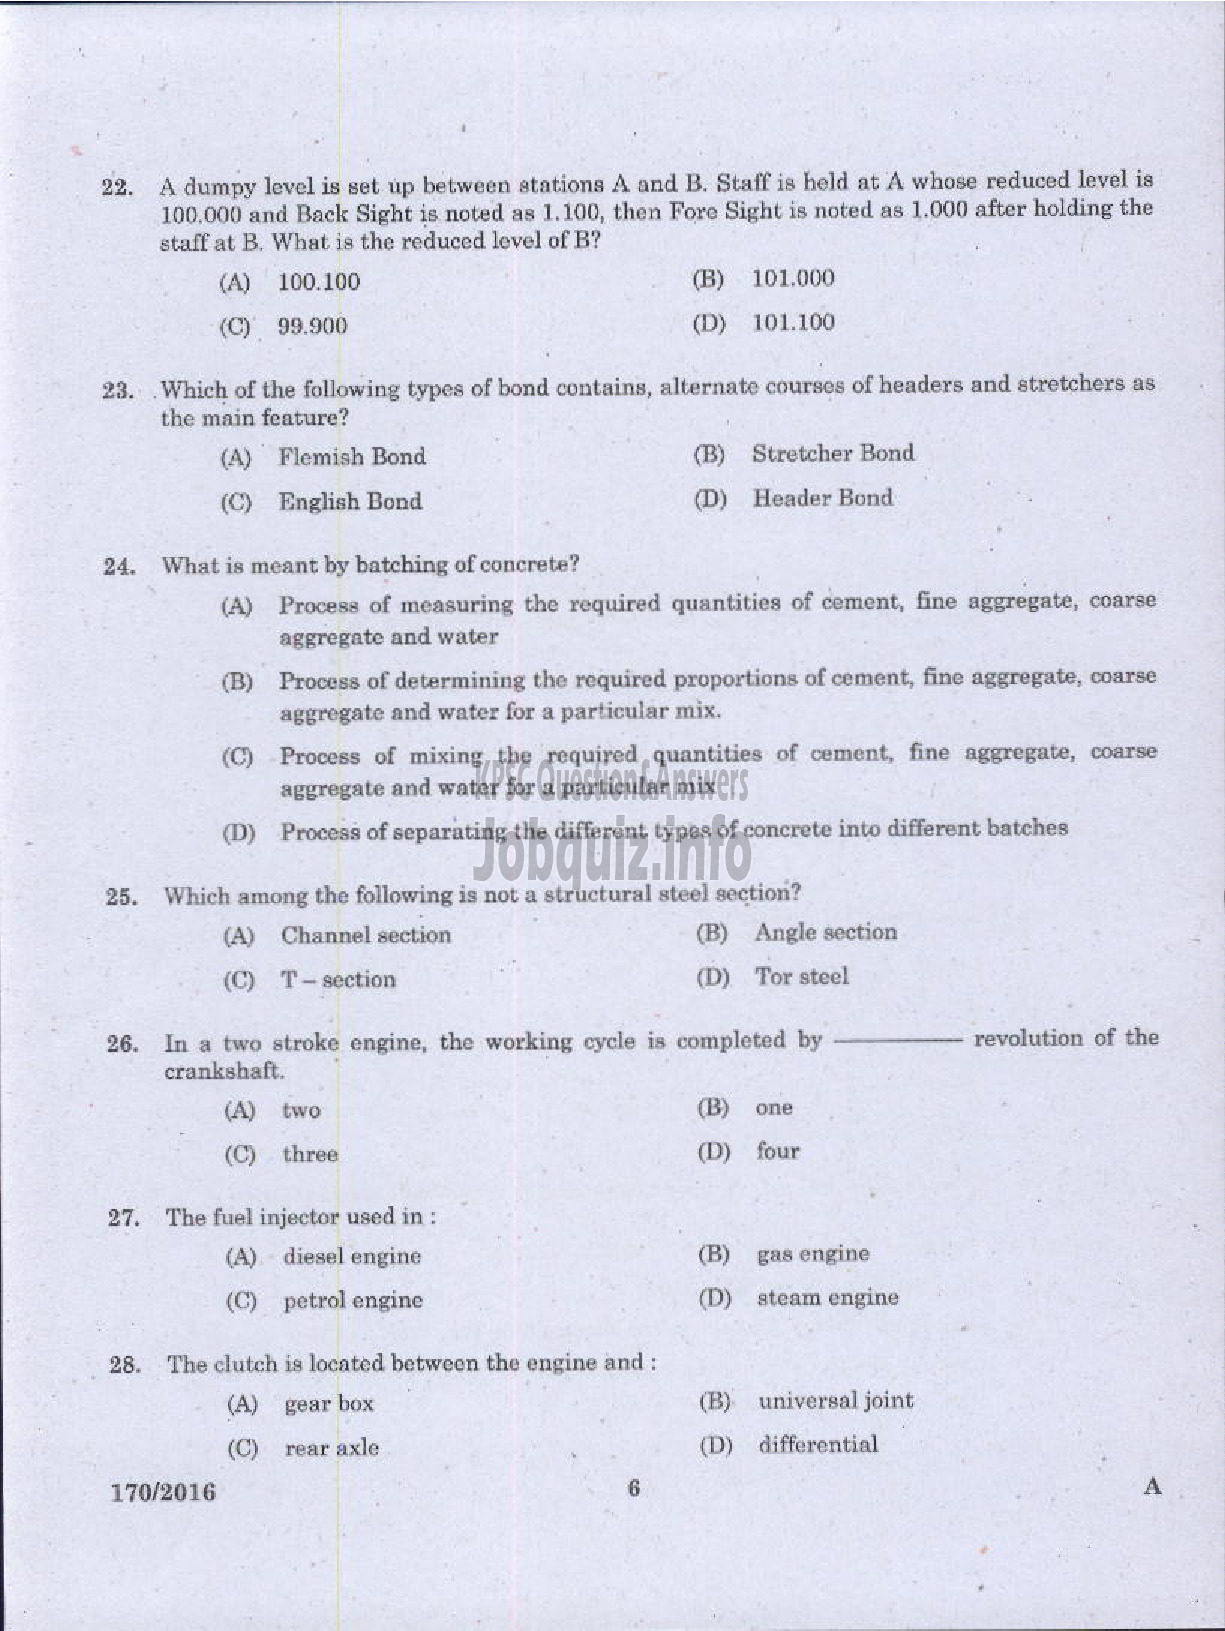 Kerala PSC Question Paper - LECTURER IN CIVIL ENGINEERING GOVT POLYTECHNICS TECHNICAL EDUCATION-4